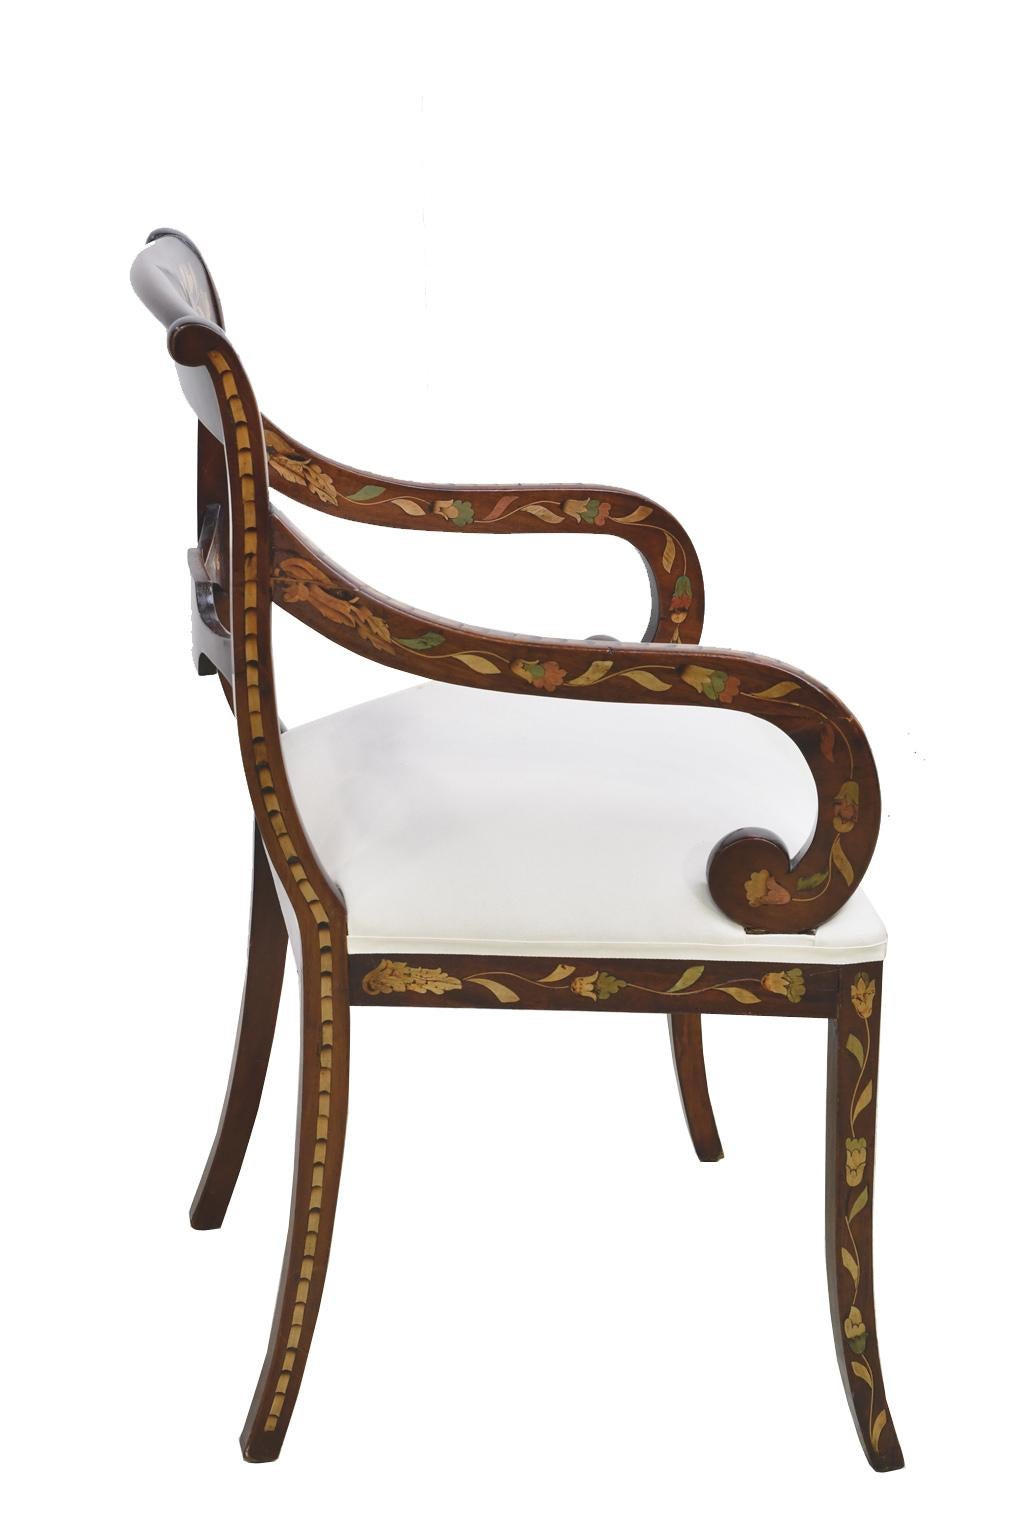 English Regency Mahogany Armchair w/ Floral Marquetry & Upholstered Seat, c 1820 1